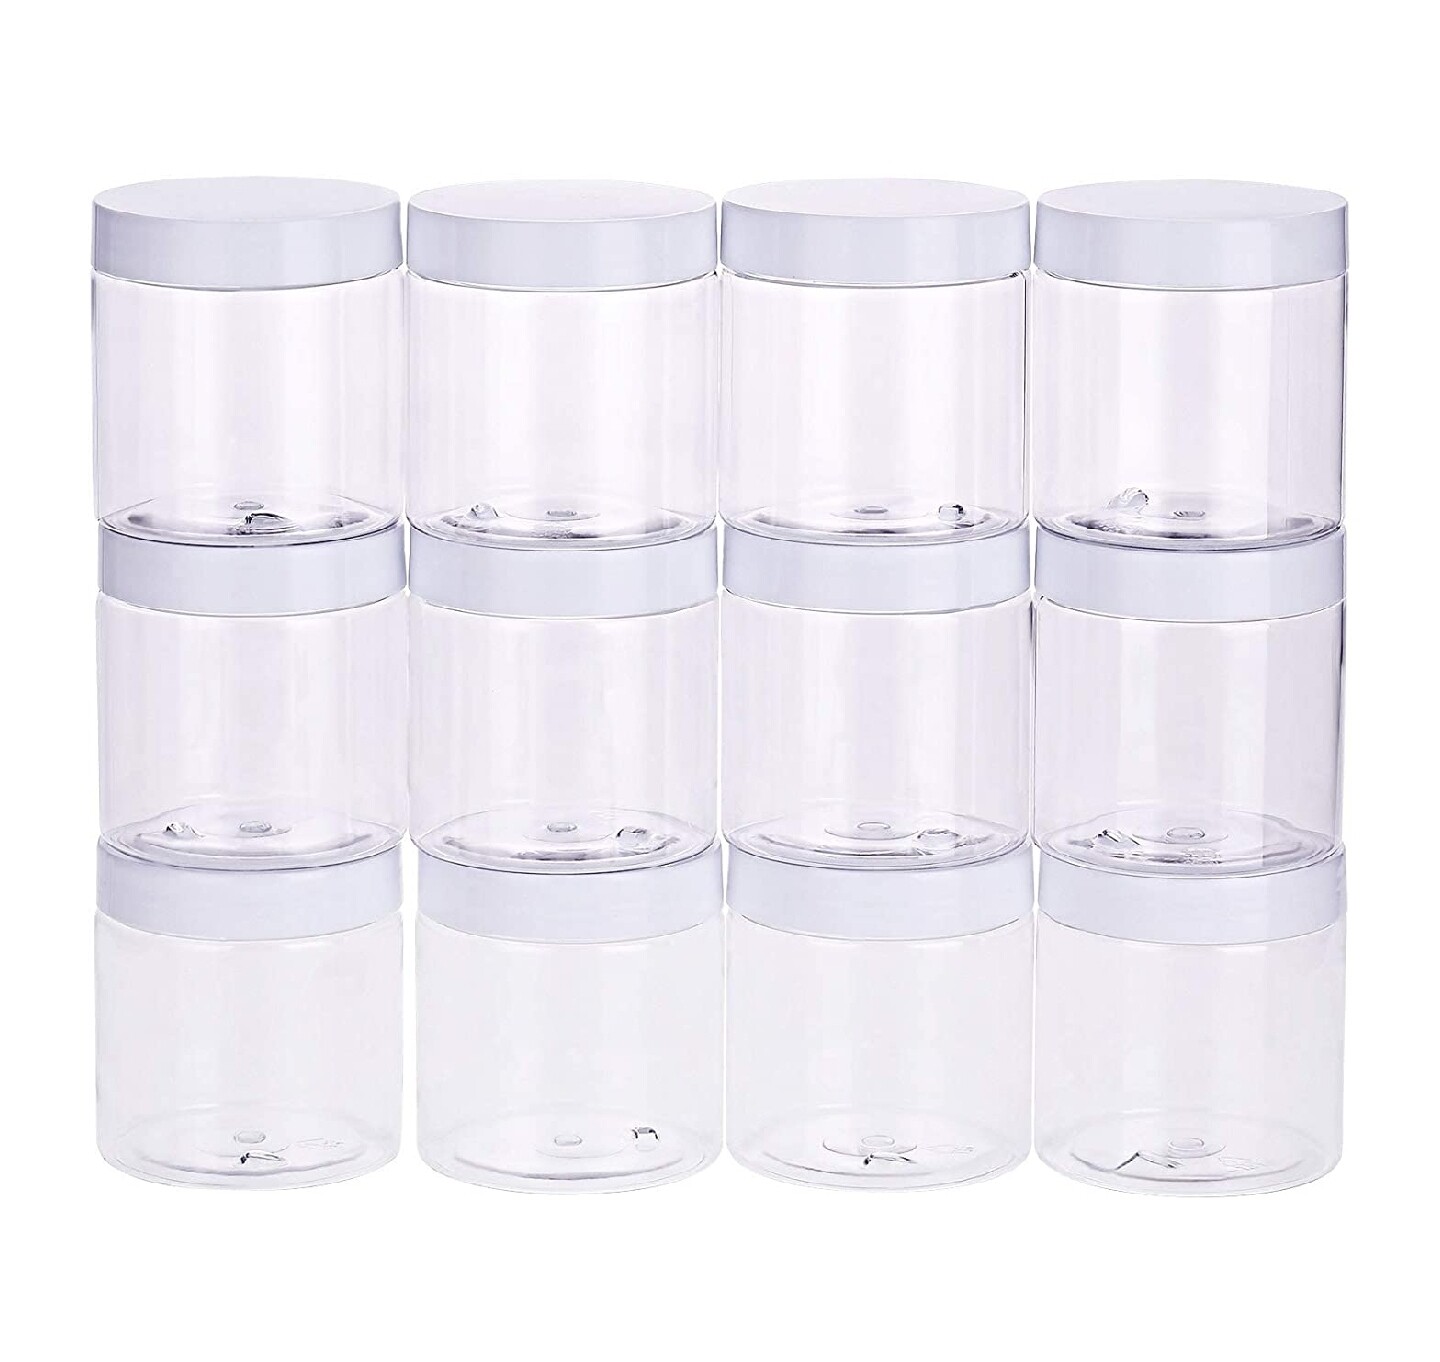 
Clear Round Wide-Mouth Plastic Jars - 8 oz, White Cap (EACH)